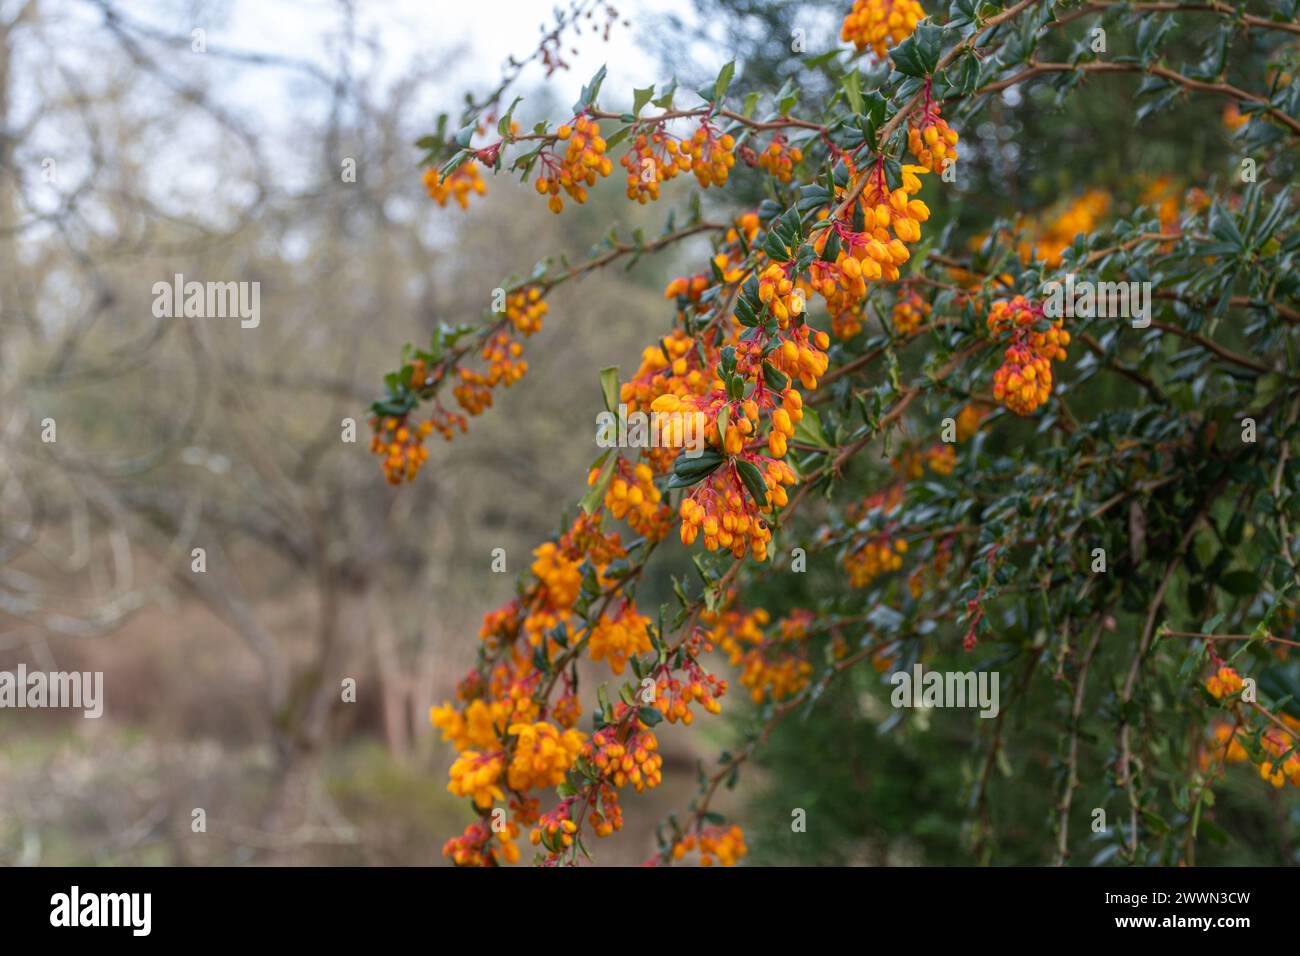 Berberis darwinni (Darwins Barberry), a colourful evergreen plant with orange-yellow flowers and prickly leaves during spring or March, England, UK Stock Photo